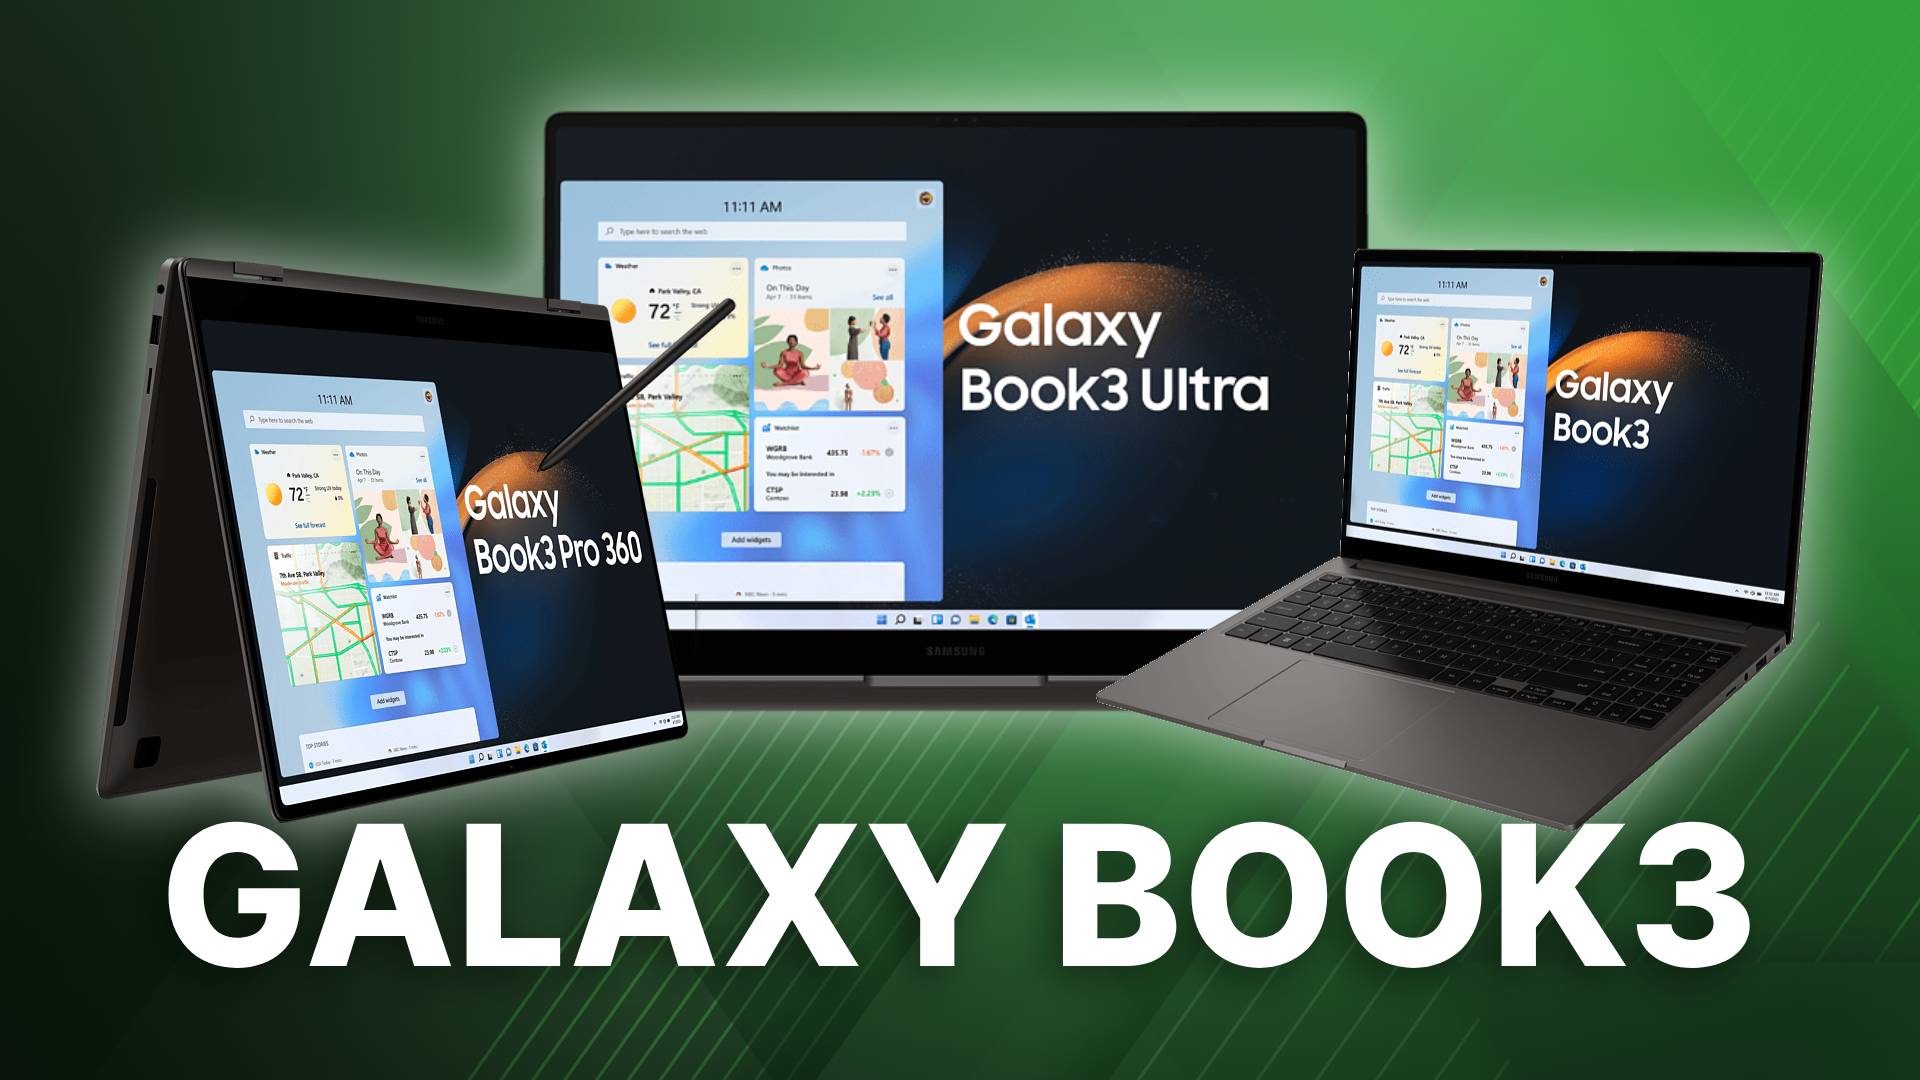 Samsung Galaxy Book3: Pre-order the new home office laptops with NVIDIA RTX 4070 & Intel i9 now